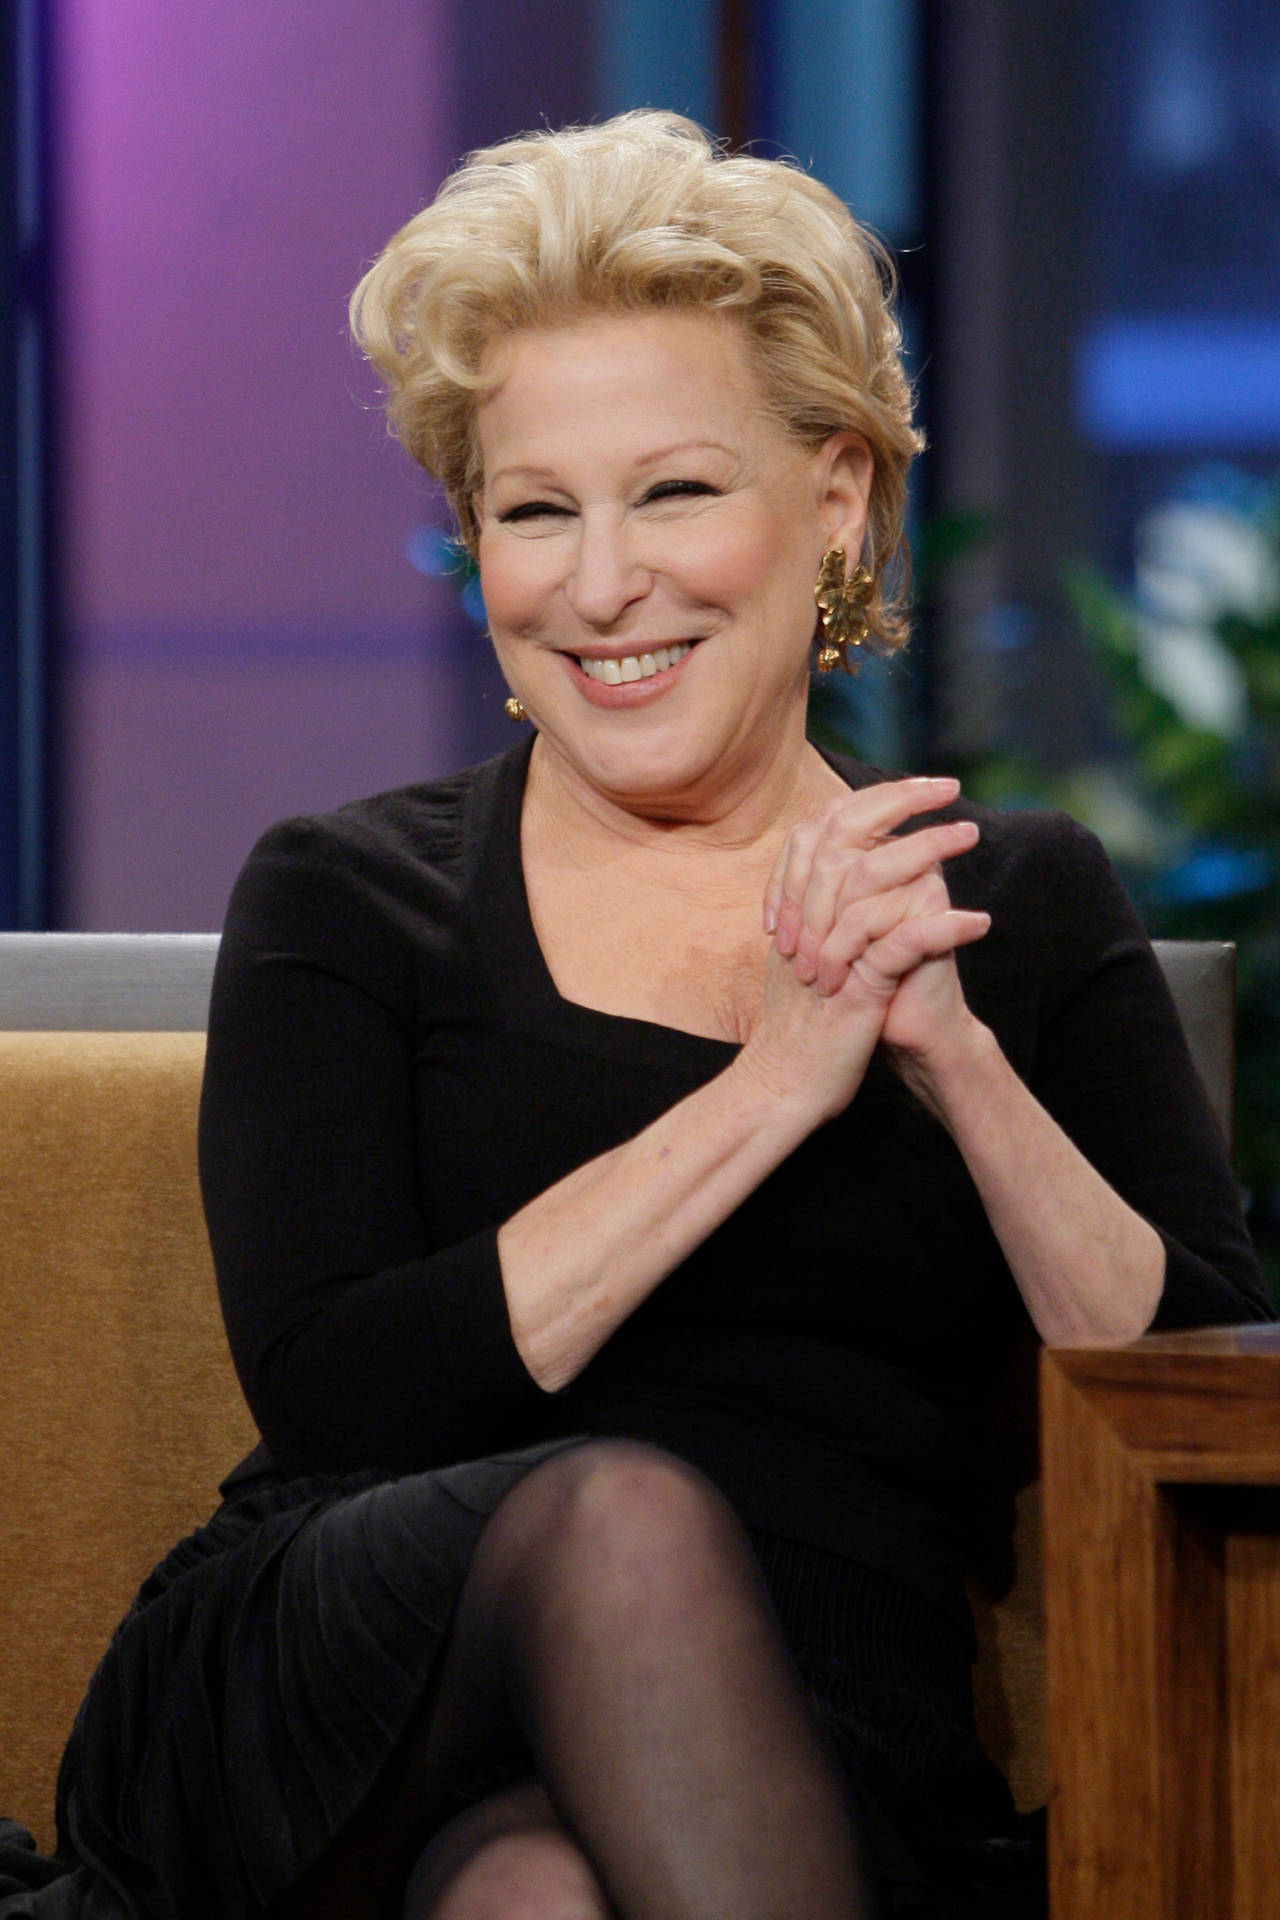 Bette Midler In Black Outfit Wallpaper